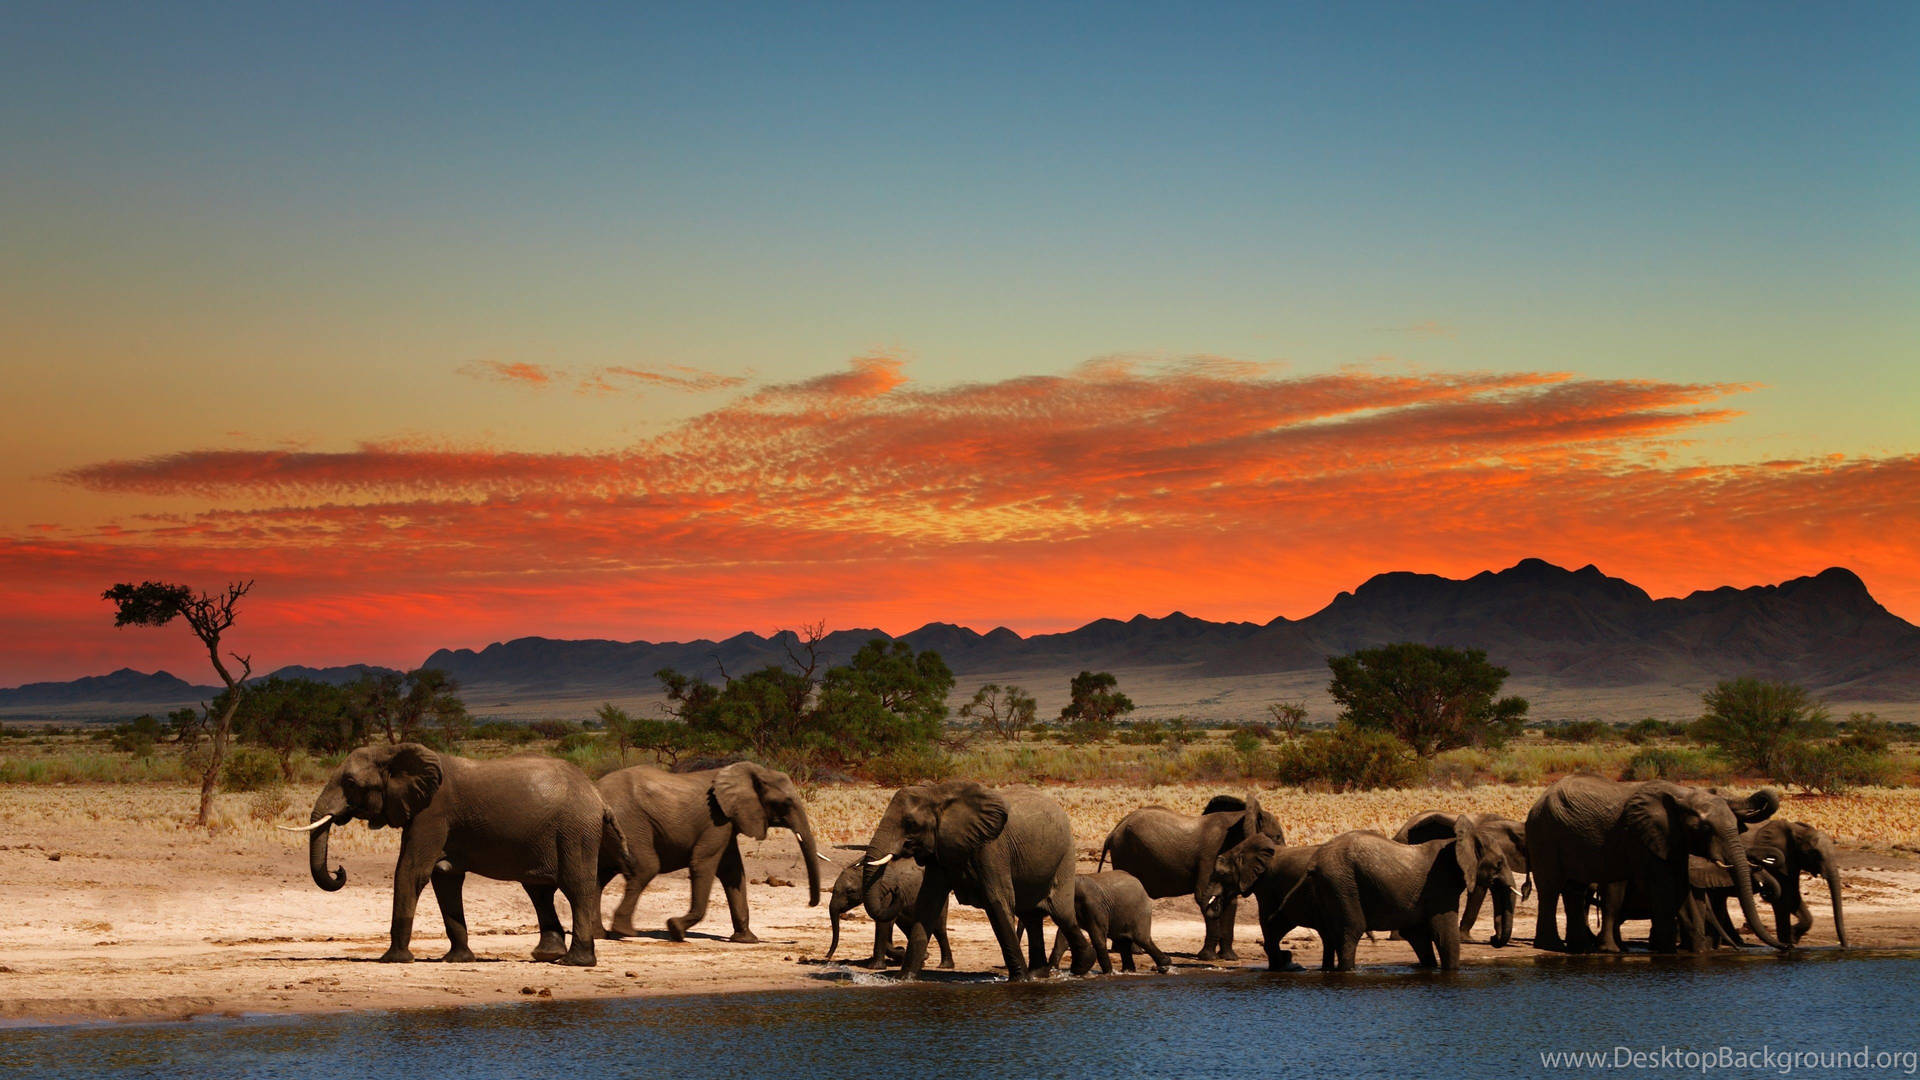 Majestic African Sunset Wallpaper